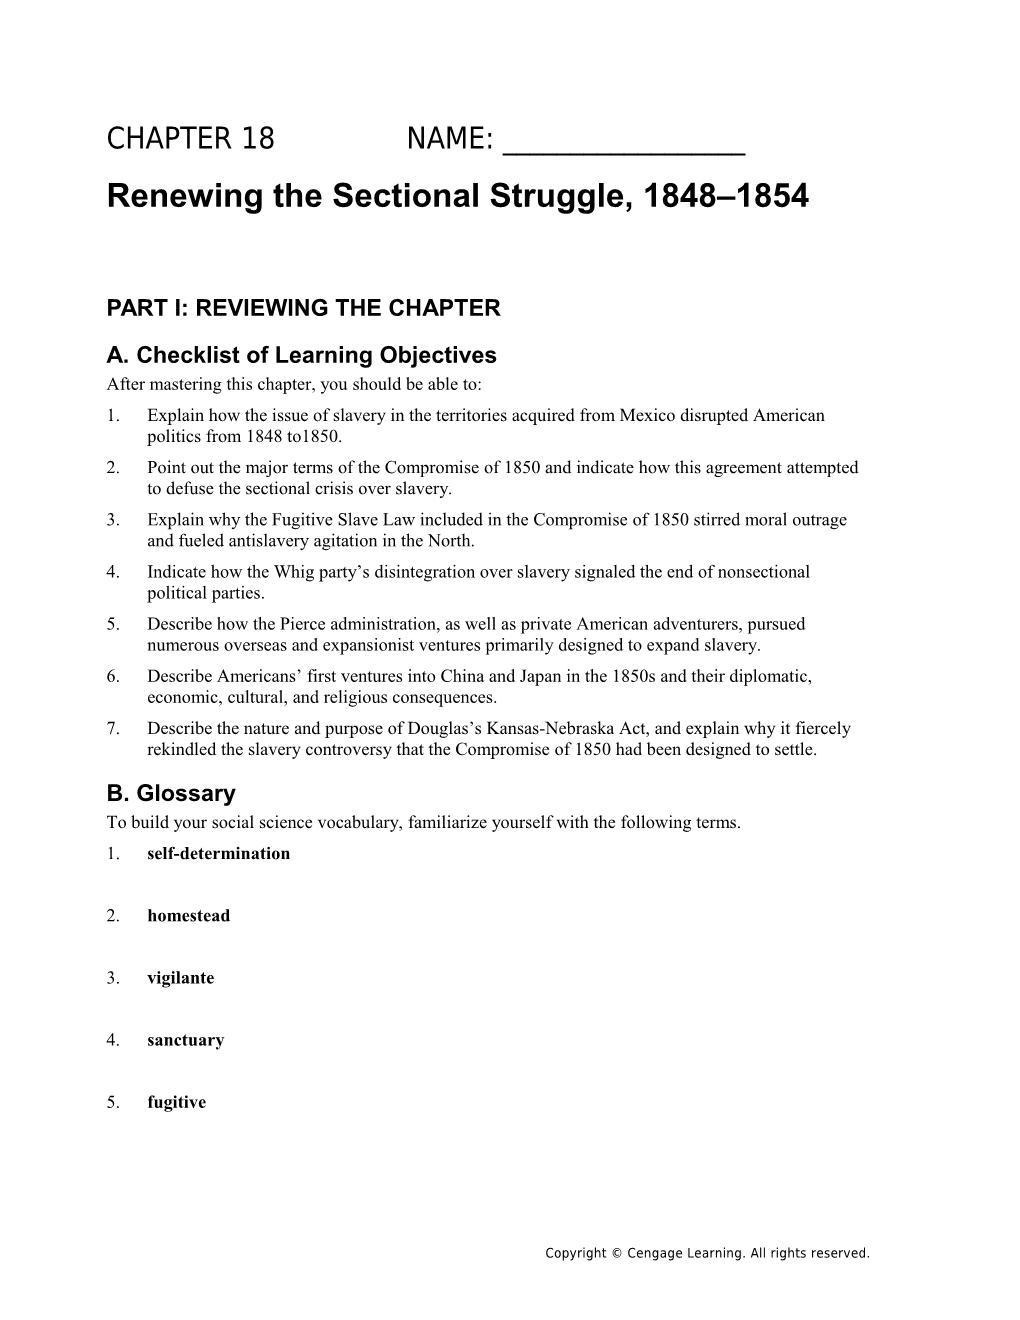 Renewing the Sectional Struggle, 1848 1854 s1